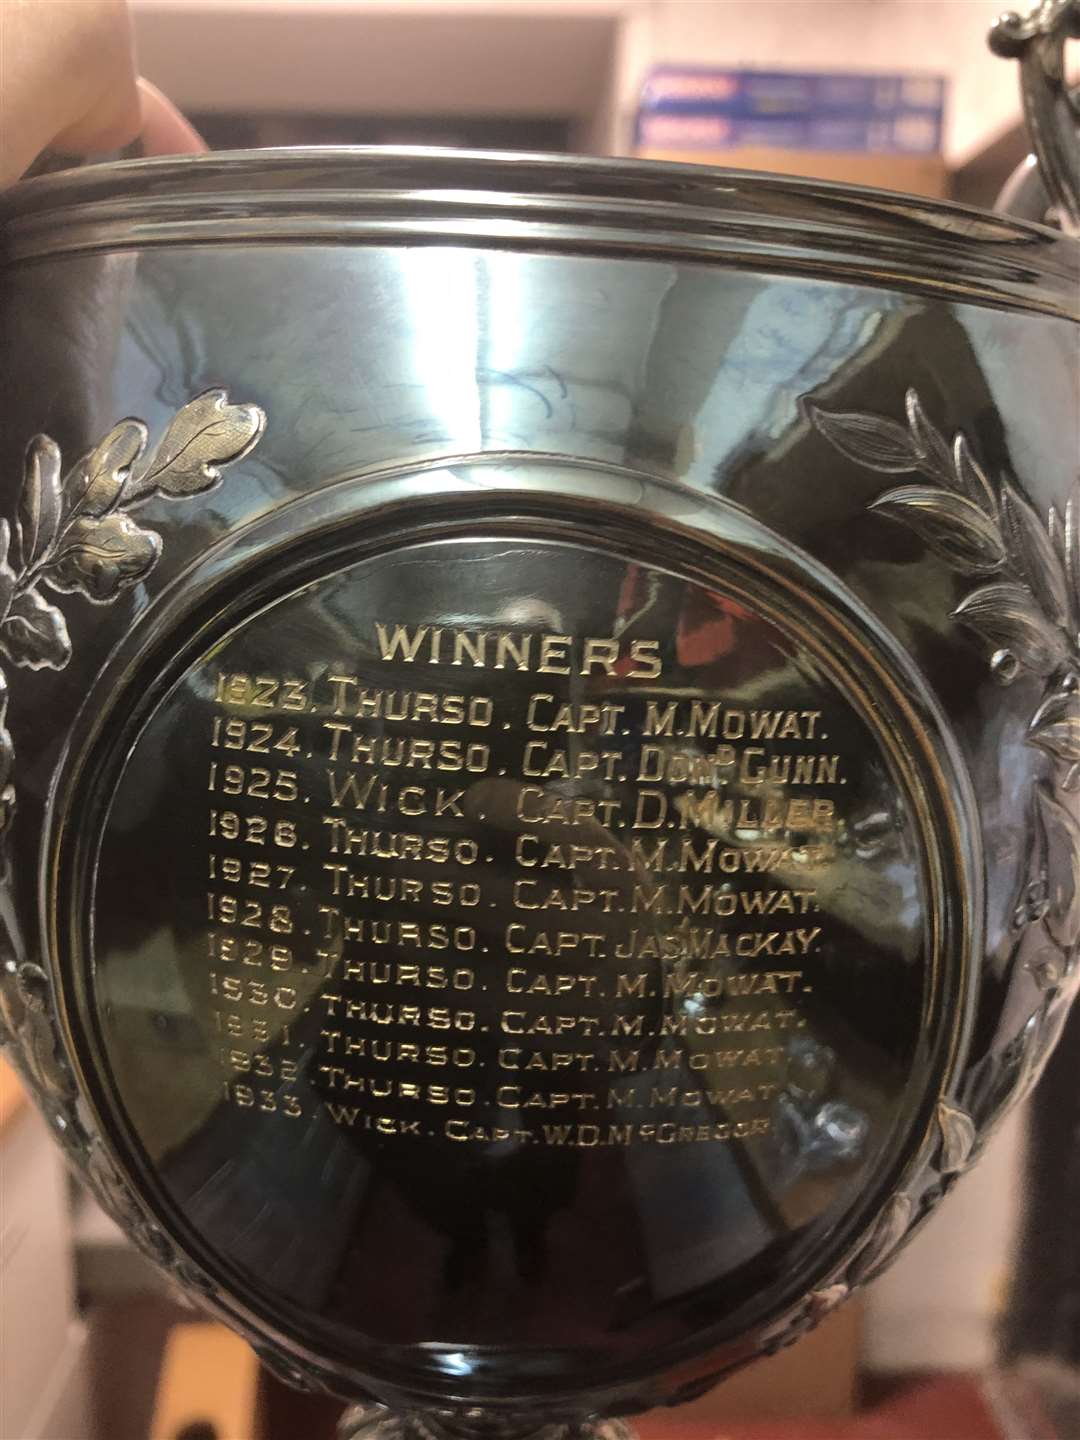 The list of names engraved on the trophy shows that Captain M Mowat was a regular winner from 1923 onwards.